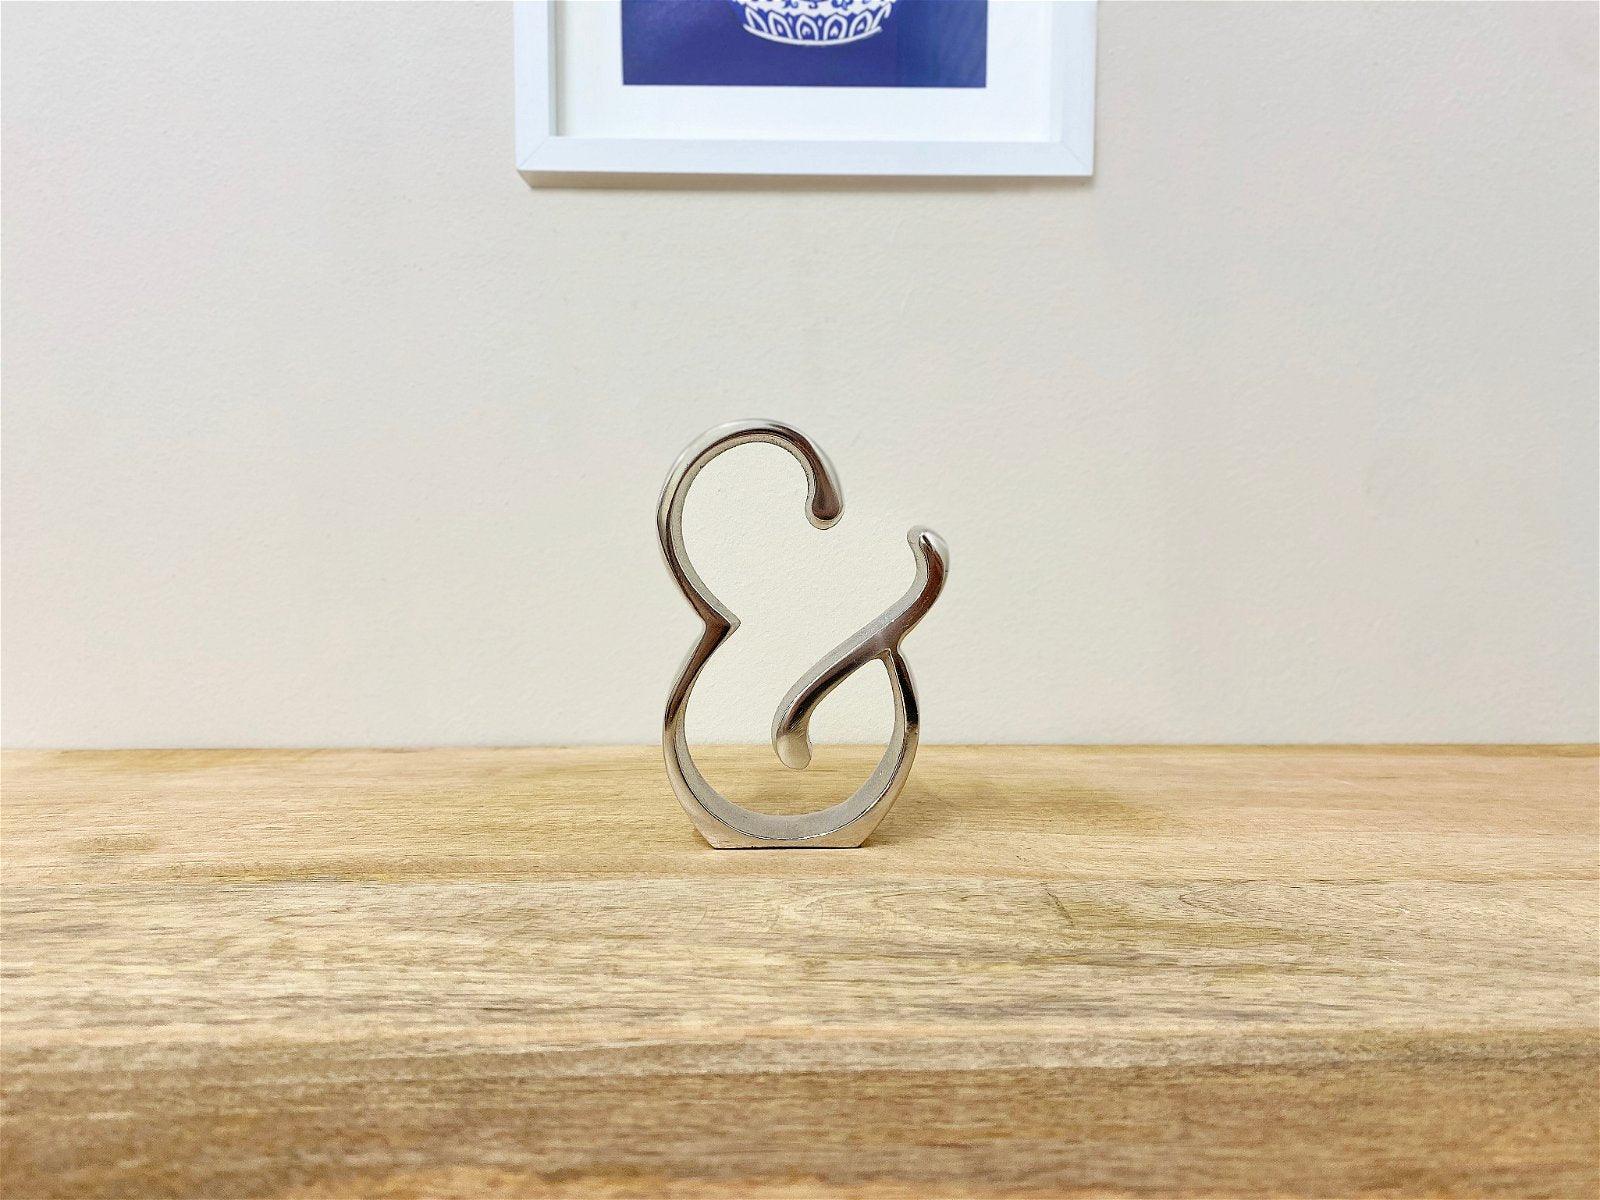 View Silver Aluminium Ampersand or And Sign Ornament information